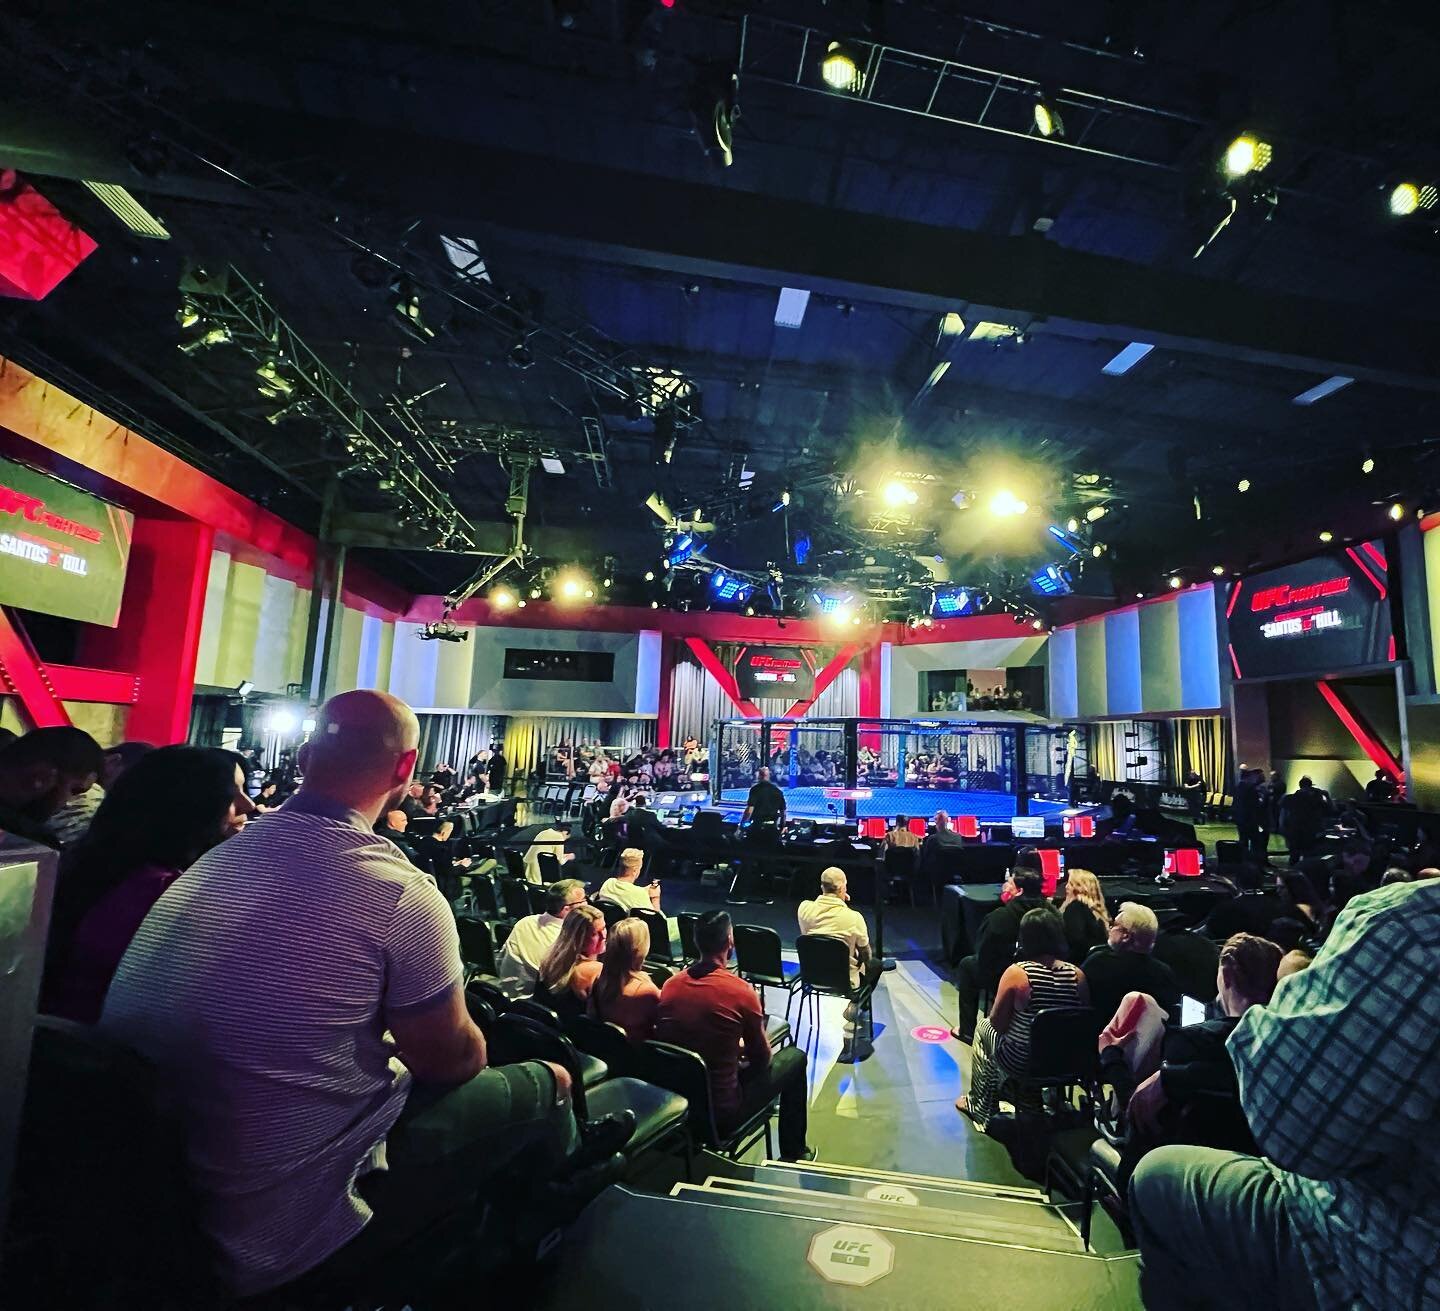 #ufcVegas59 was a night full of knockouts&hellip;literally! Packed house and the crew putting in the work.  Stay tuned&hellip;we have so many more events coming up! #concominc @ufc 

#thetotalproductioncompany #concom_inc #productioncompany #producti